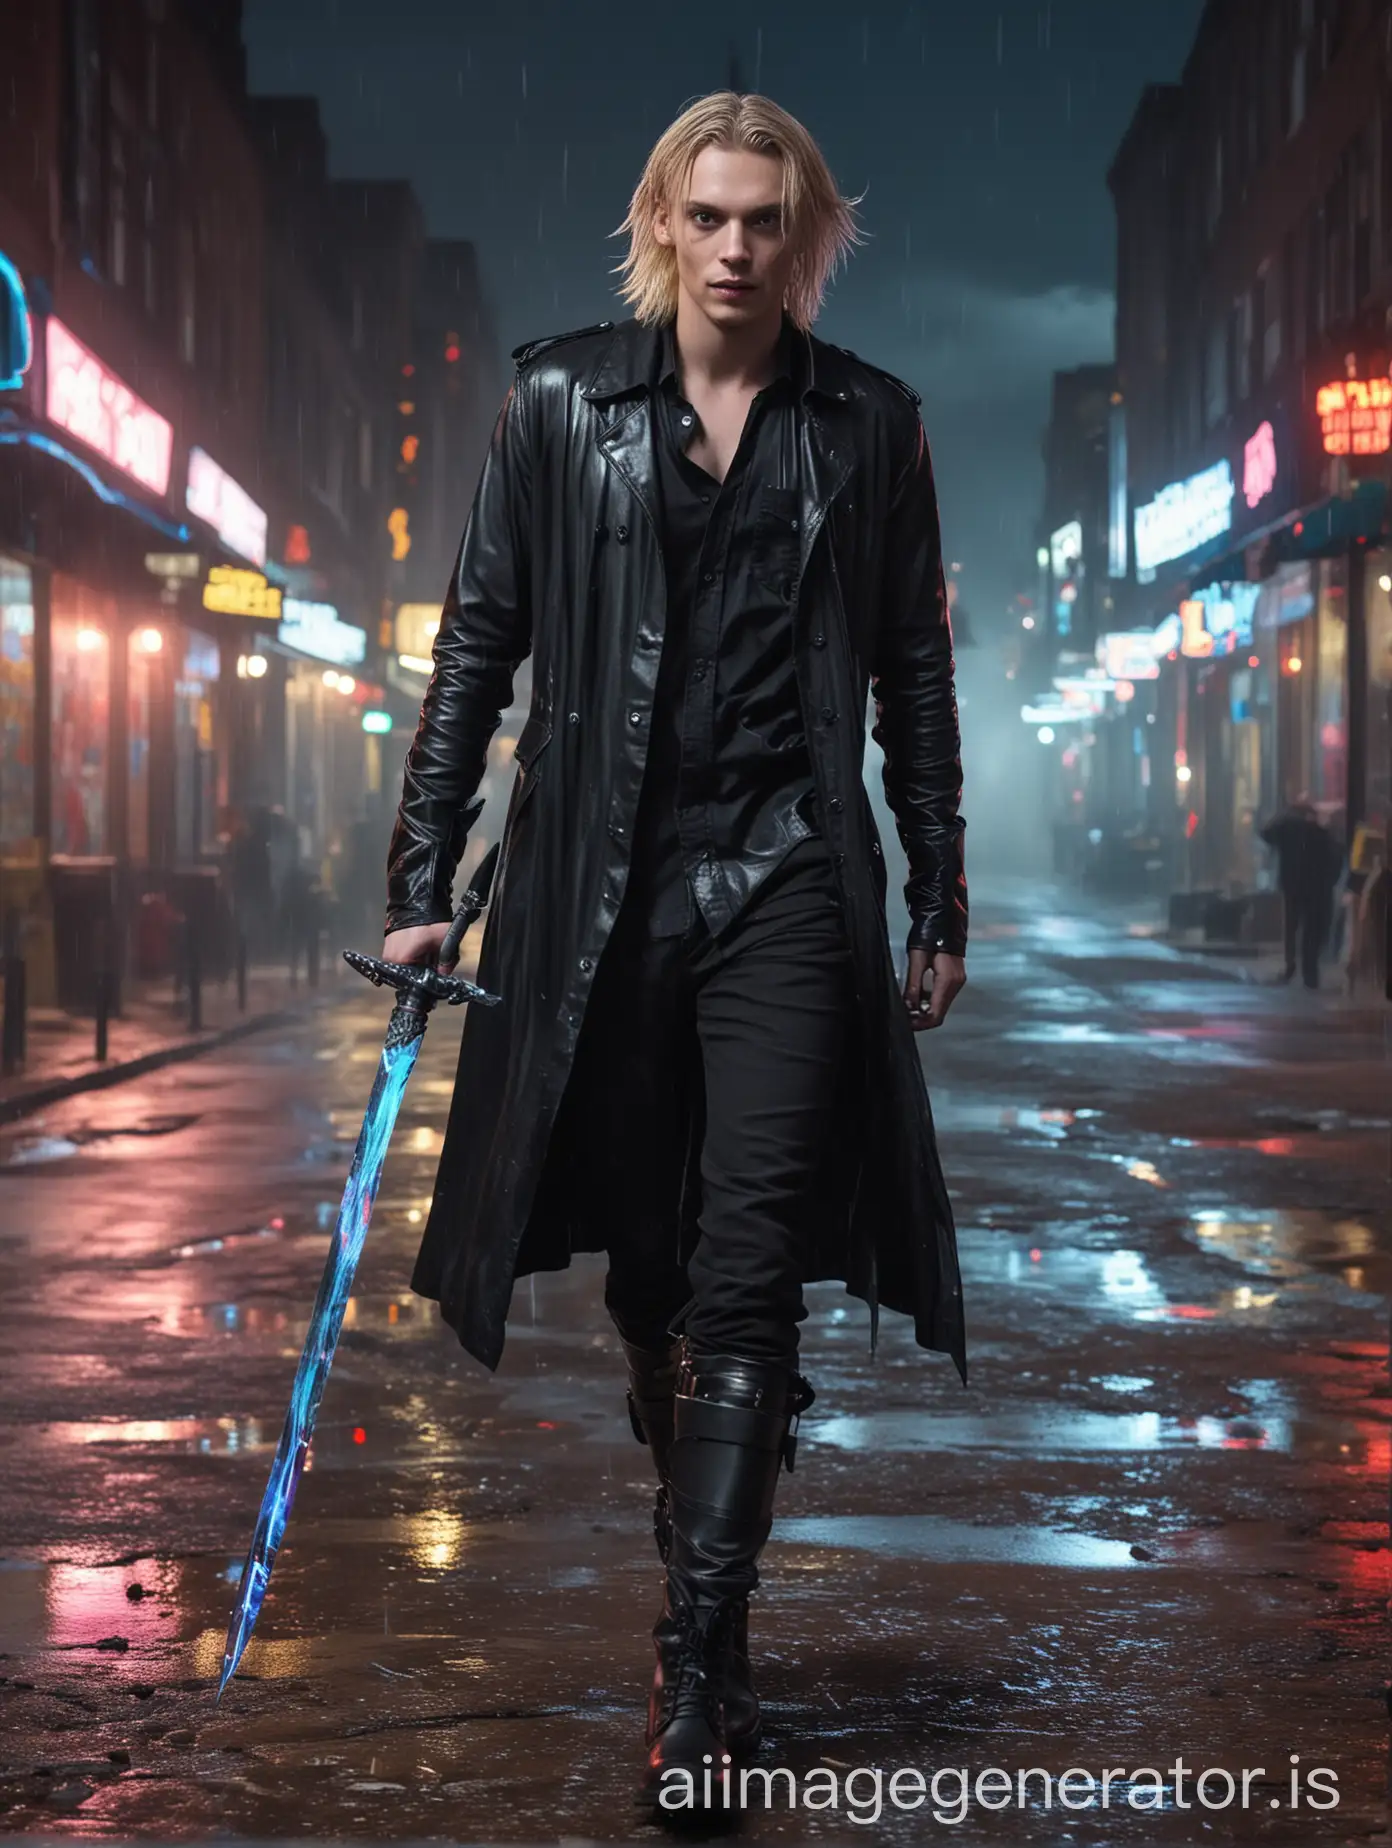 Jamie Campbell Bower face, walking with a curved glowing glass sword in hand, beautiful bright blue eyes, platinum blonde hair, mischievous smiling face, black unbuttoned shirt, toronto city colorful neon nightlights, wearing black army boots, stormy clouds, foggy background, wet brickroad